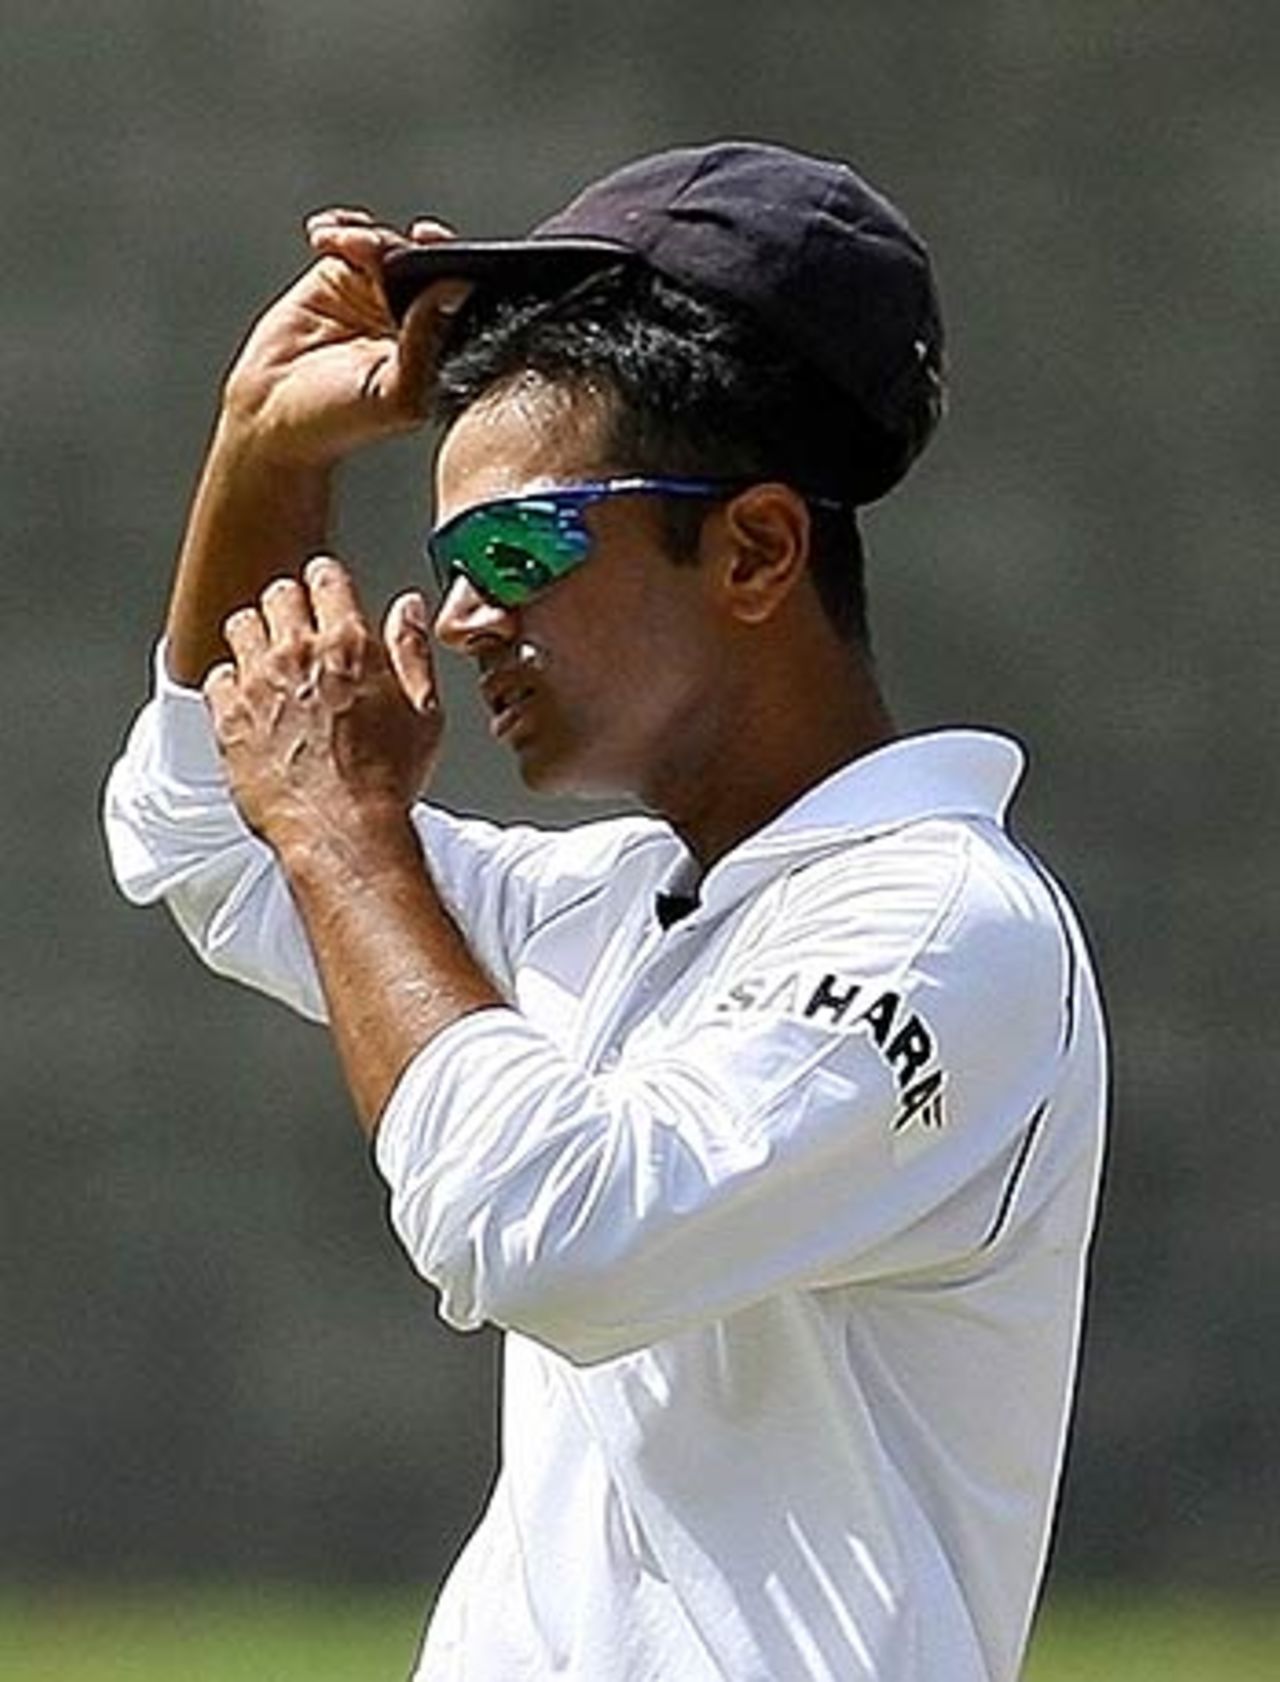 Rahul Dravid anxiously waits for a breakthrough, West Indies v India, 2nd Test, St Lucia, 5th day, June 14, 2006